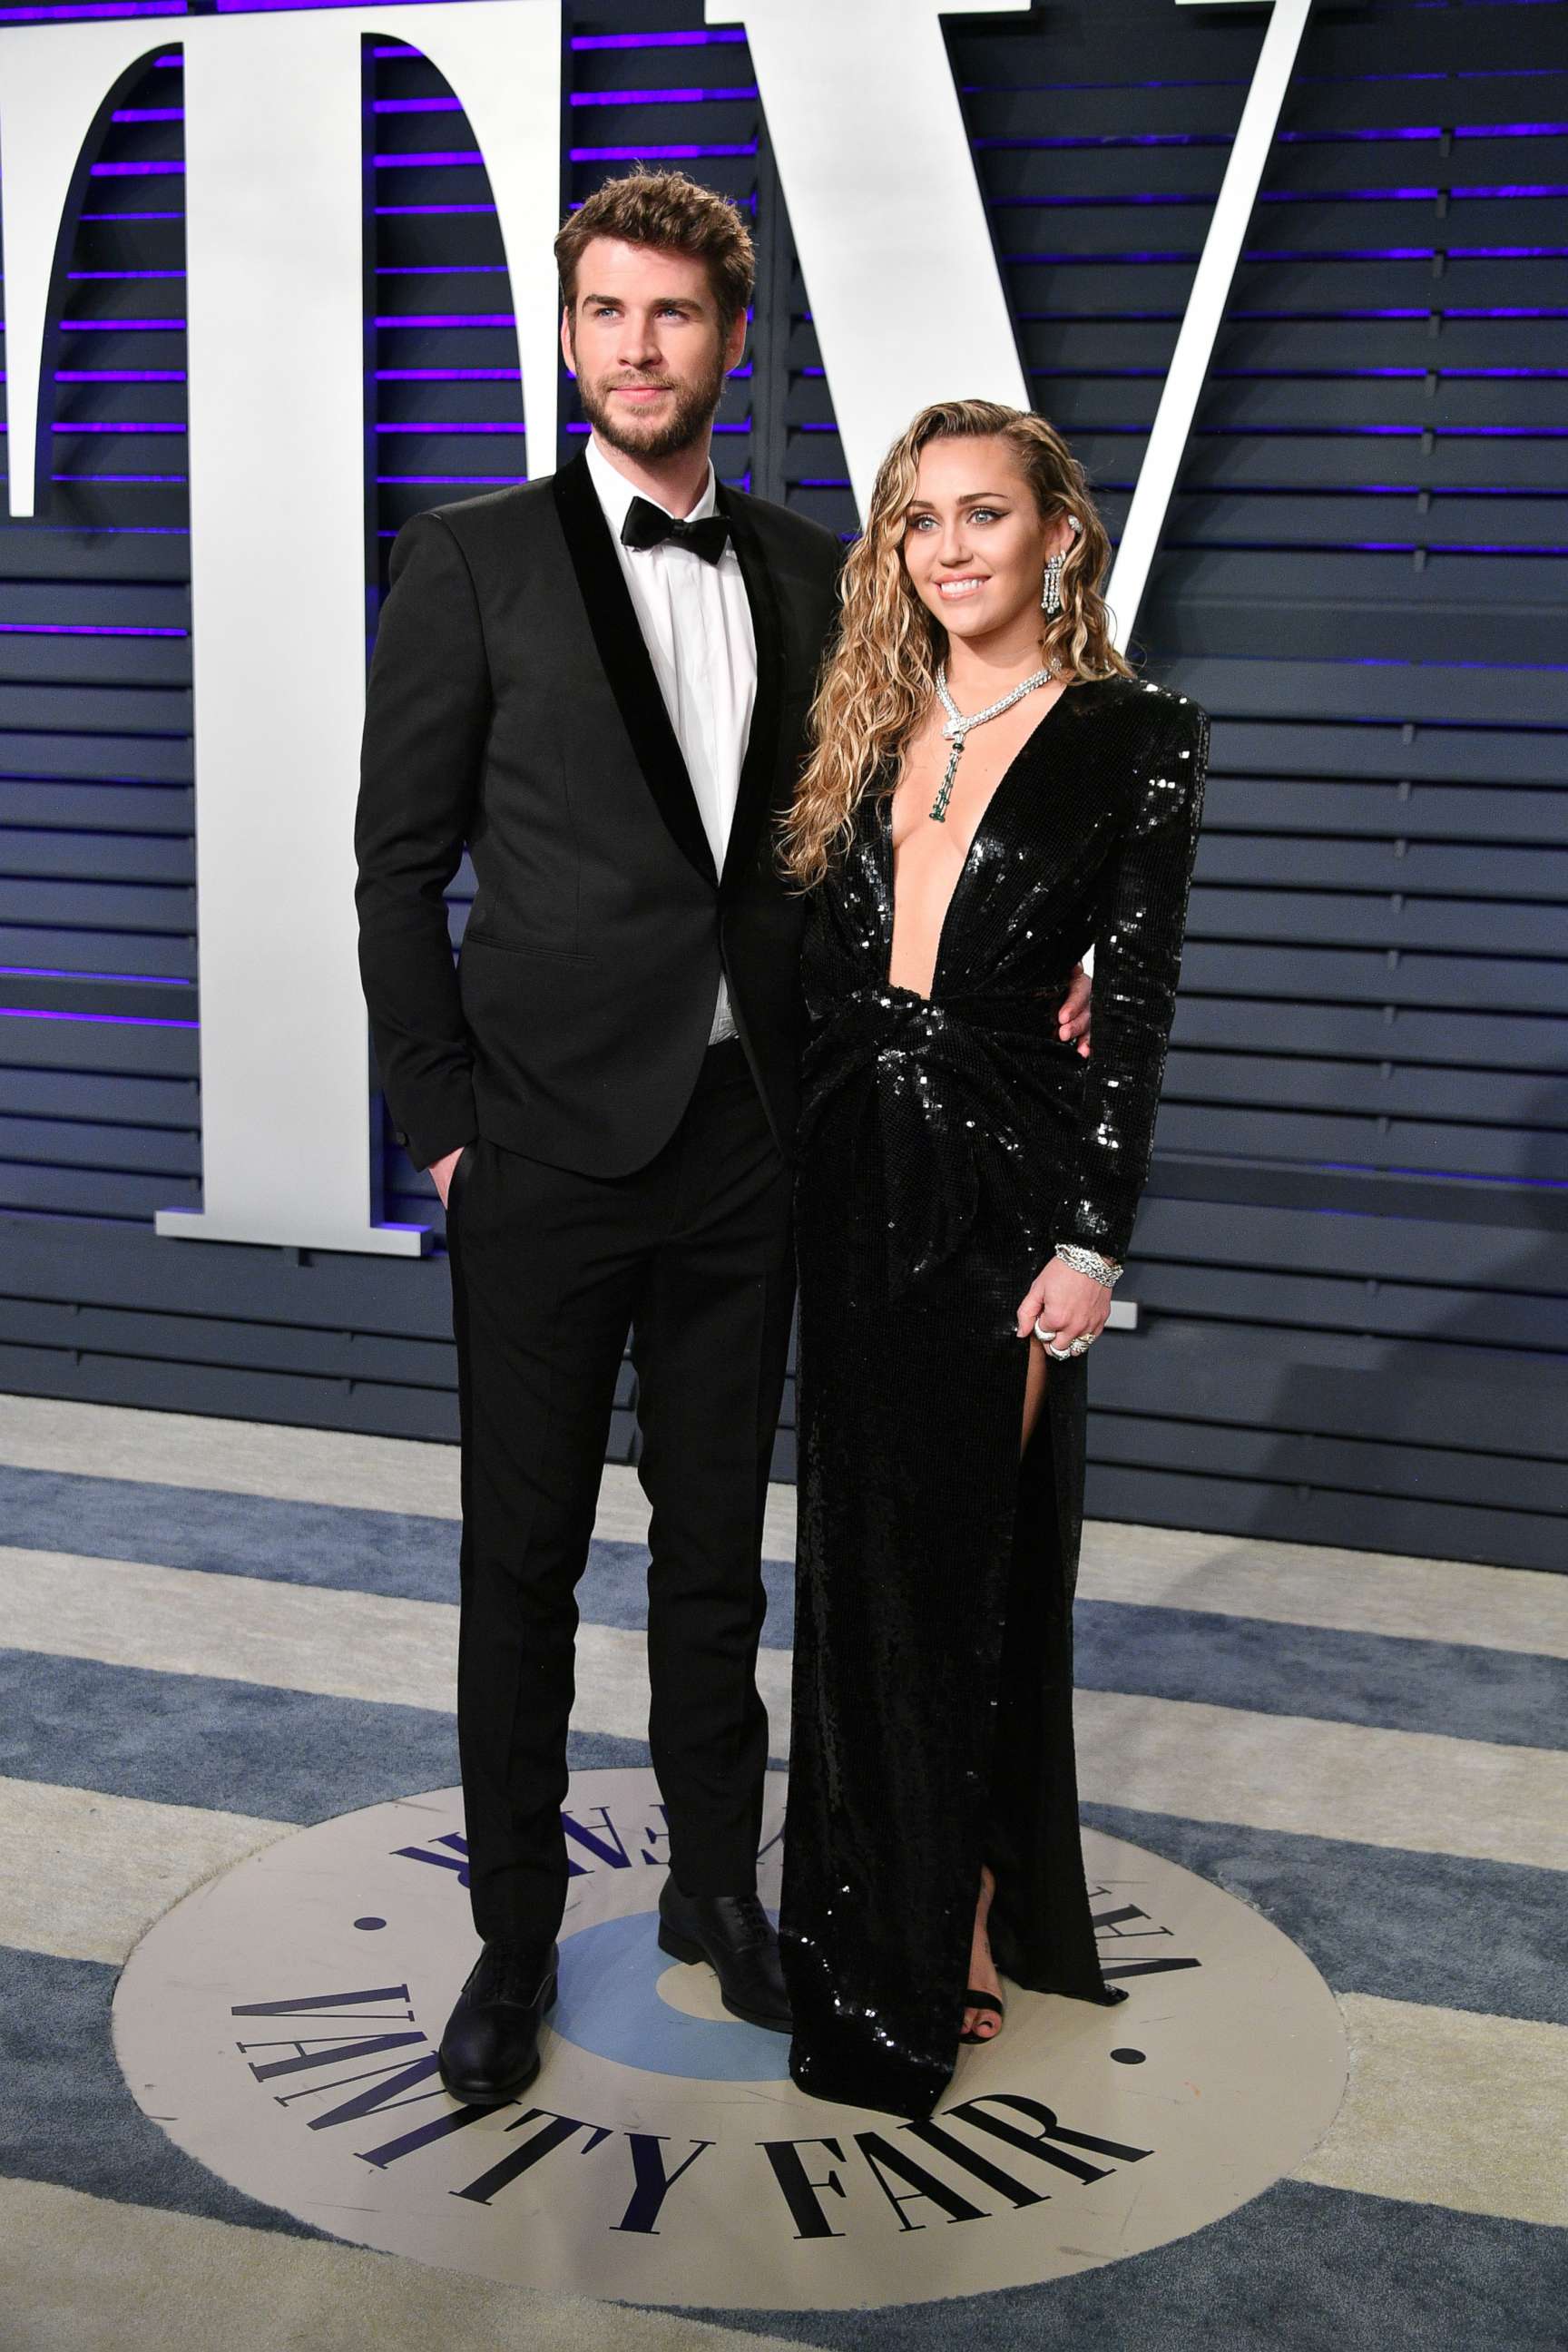 PHOTO: Liam Hemsworth and Miley Cyrus attend the 2019 Vanity Fair Oscar Party hosted by Radhika Jones at Wallis Annenberg Center for the Performing Arts, Feb. 24, 2019, in Beverly Hills, Calif.